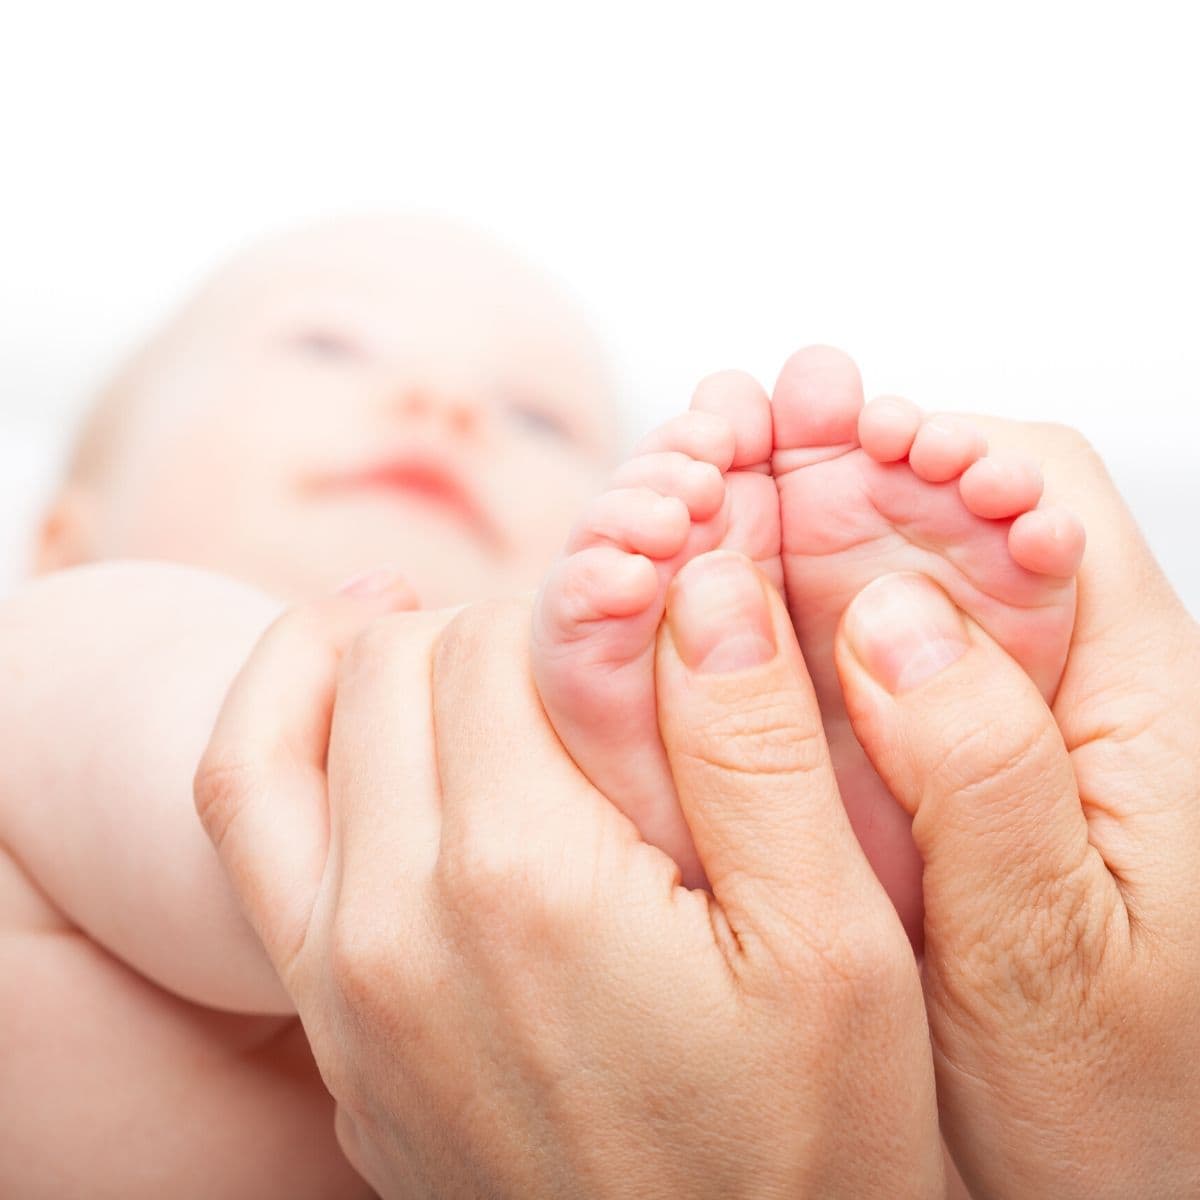 mother's hands holding infant baby's feet